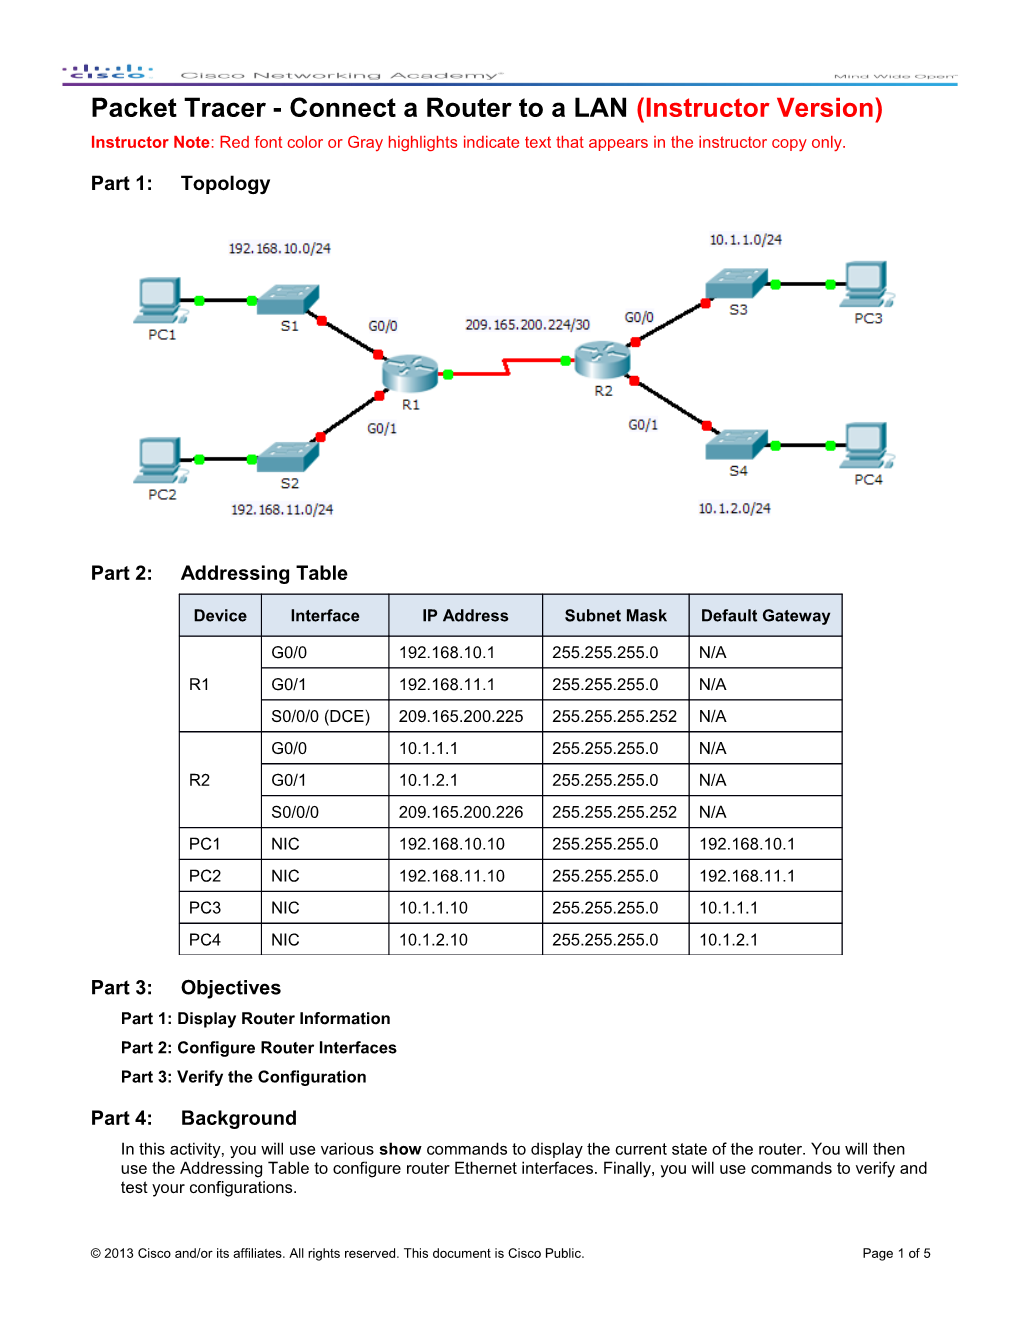 Packet Tracer - Connect a Router to a LAN